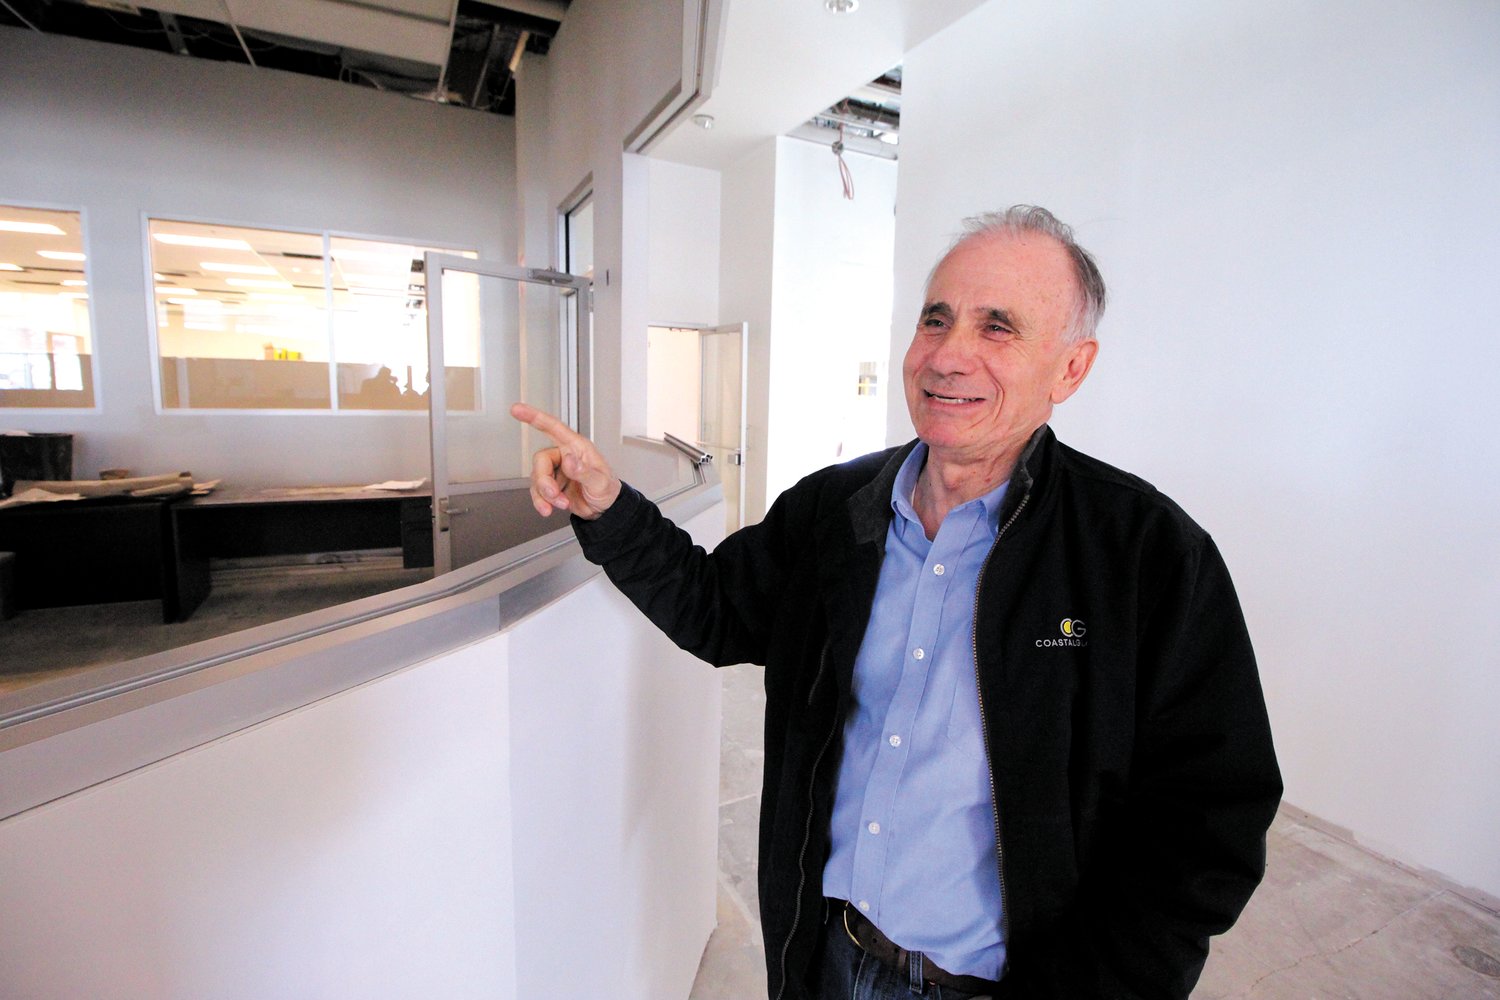 NO TOO FAR IN THE FUTURE: RISPCA board chair Wayne Kezirian points to a rendering of the receptionists’ desk that isn’t that far from becoming reality.